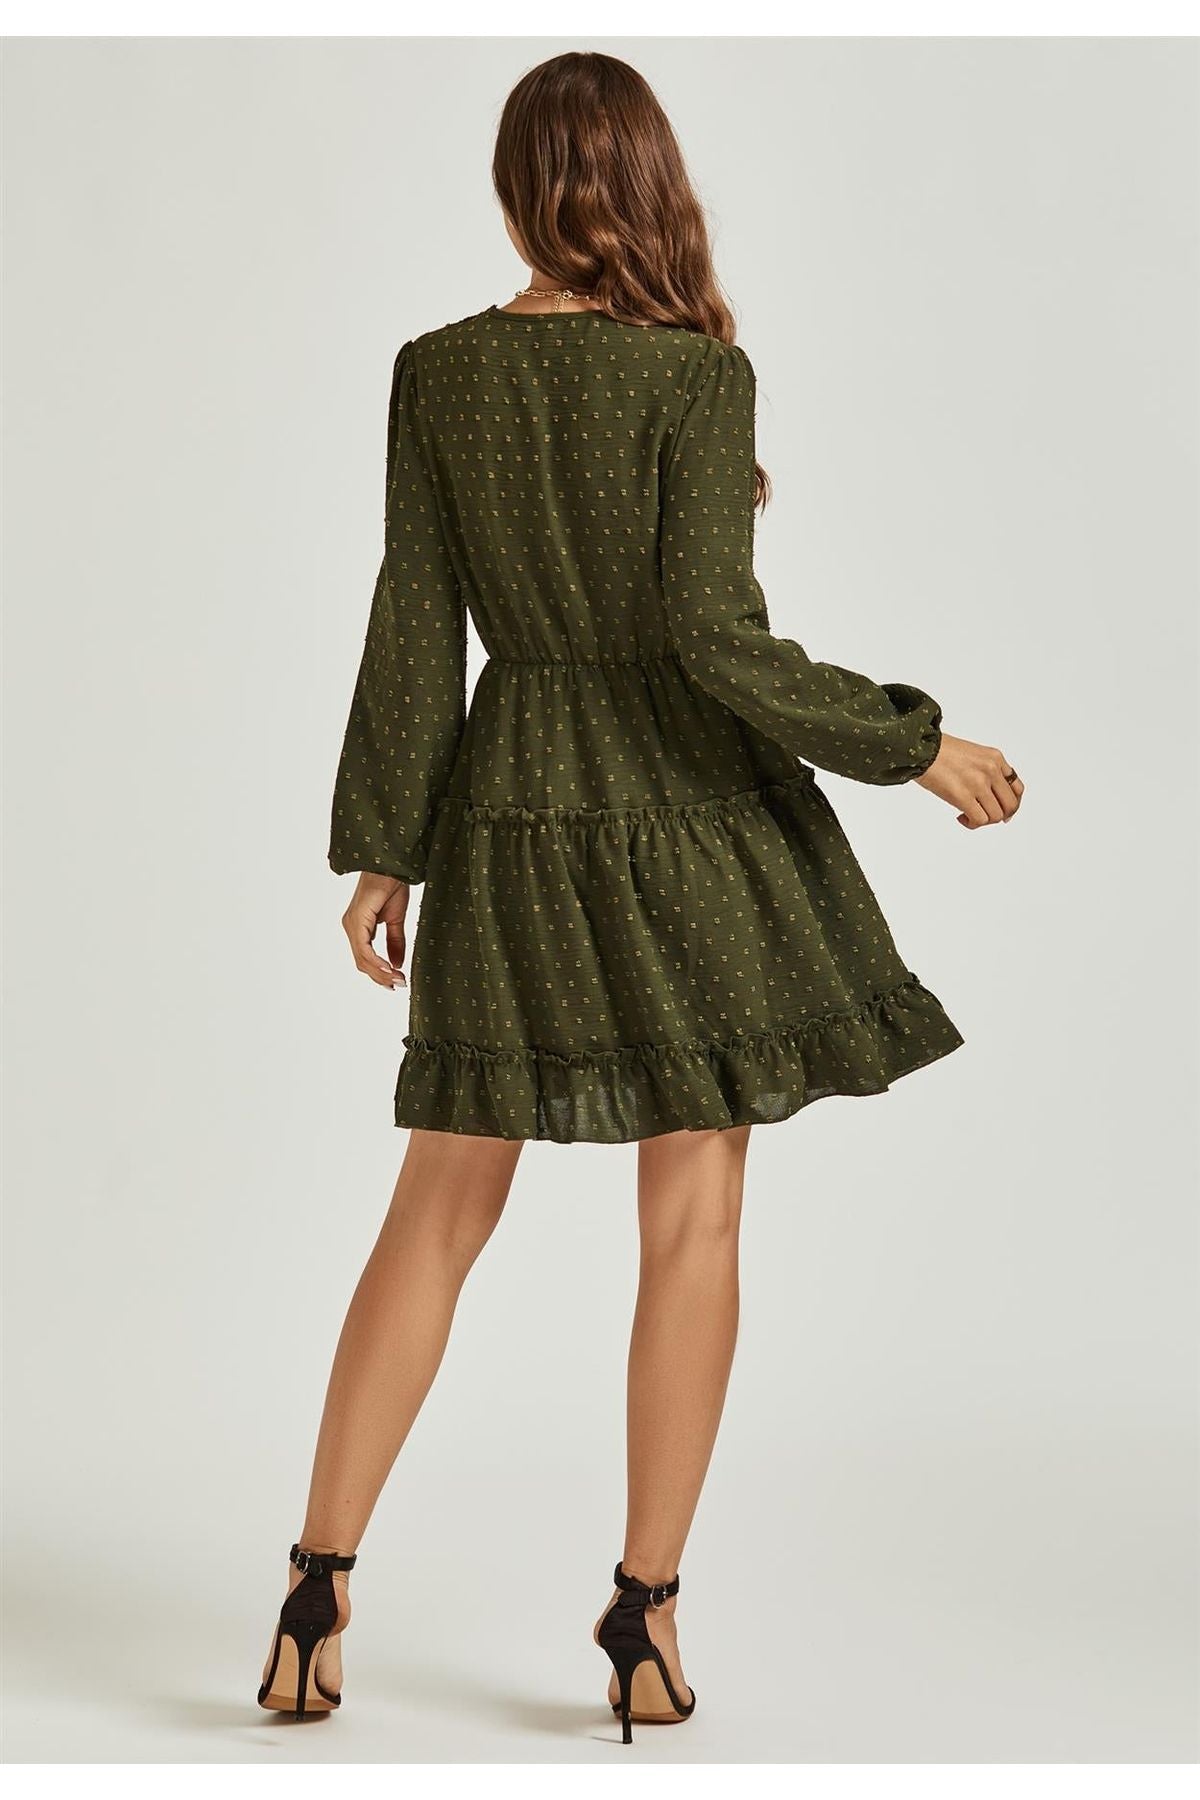 Long Sleeve Lace Detail Wrap Style Tulle Frill Mini Dress In Olive Green FS495-OliveGreen